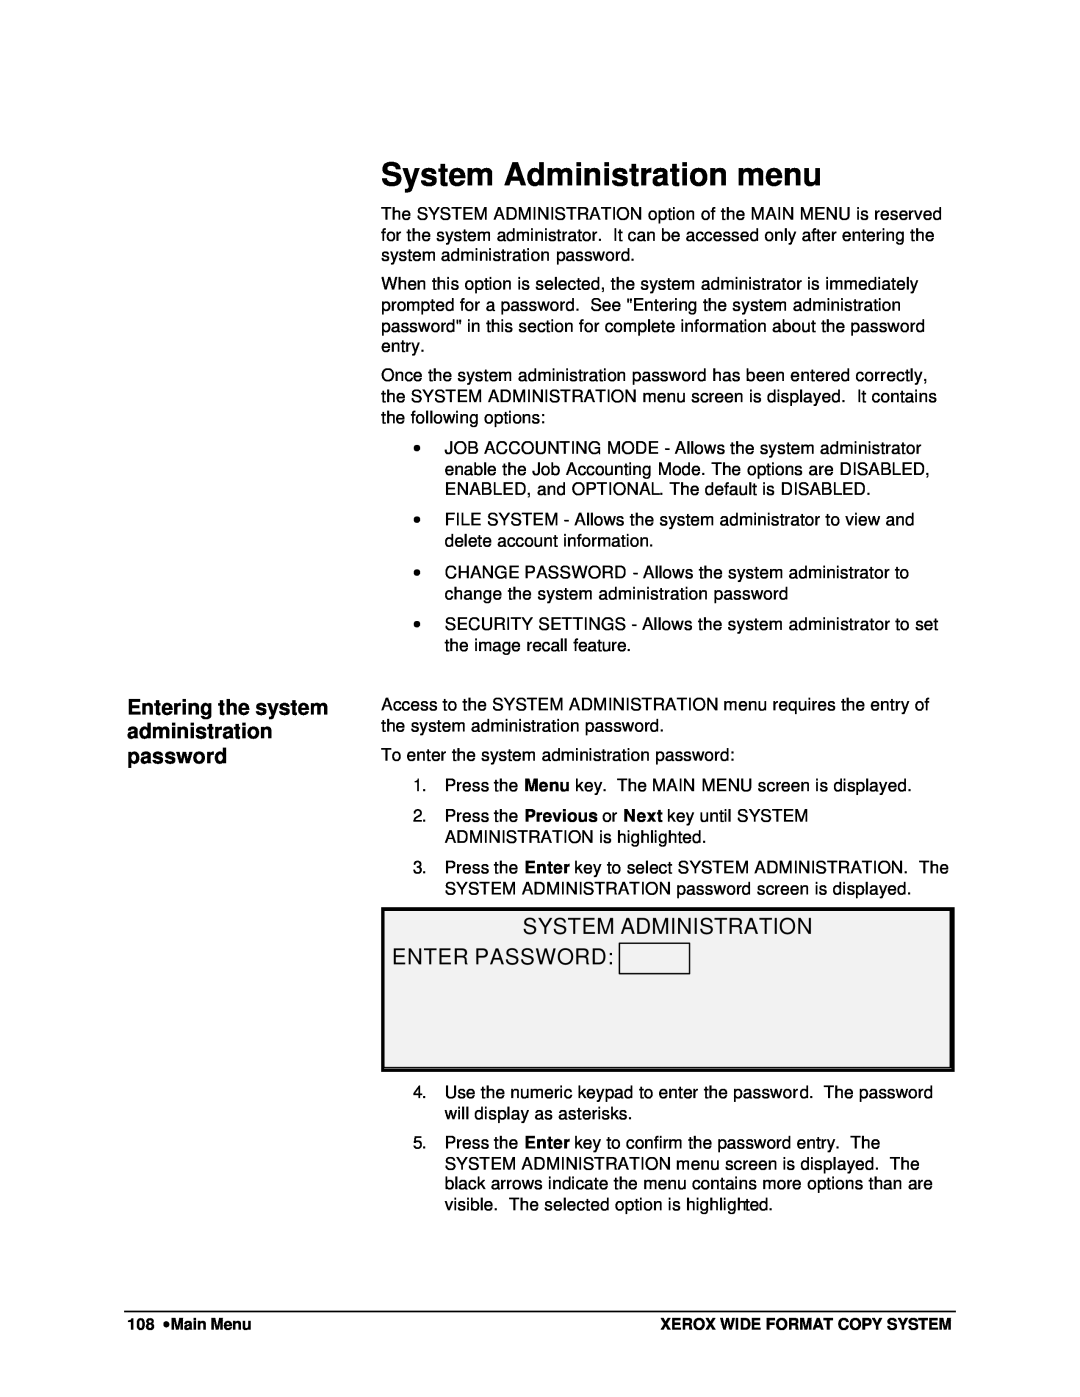 Xerox 8830, 8825, 8850, X2 manual System Administration menu, System Administration Enter Password 